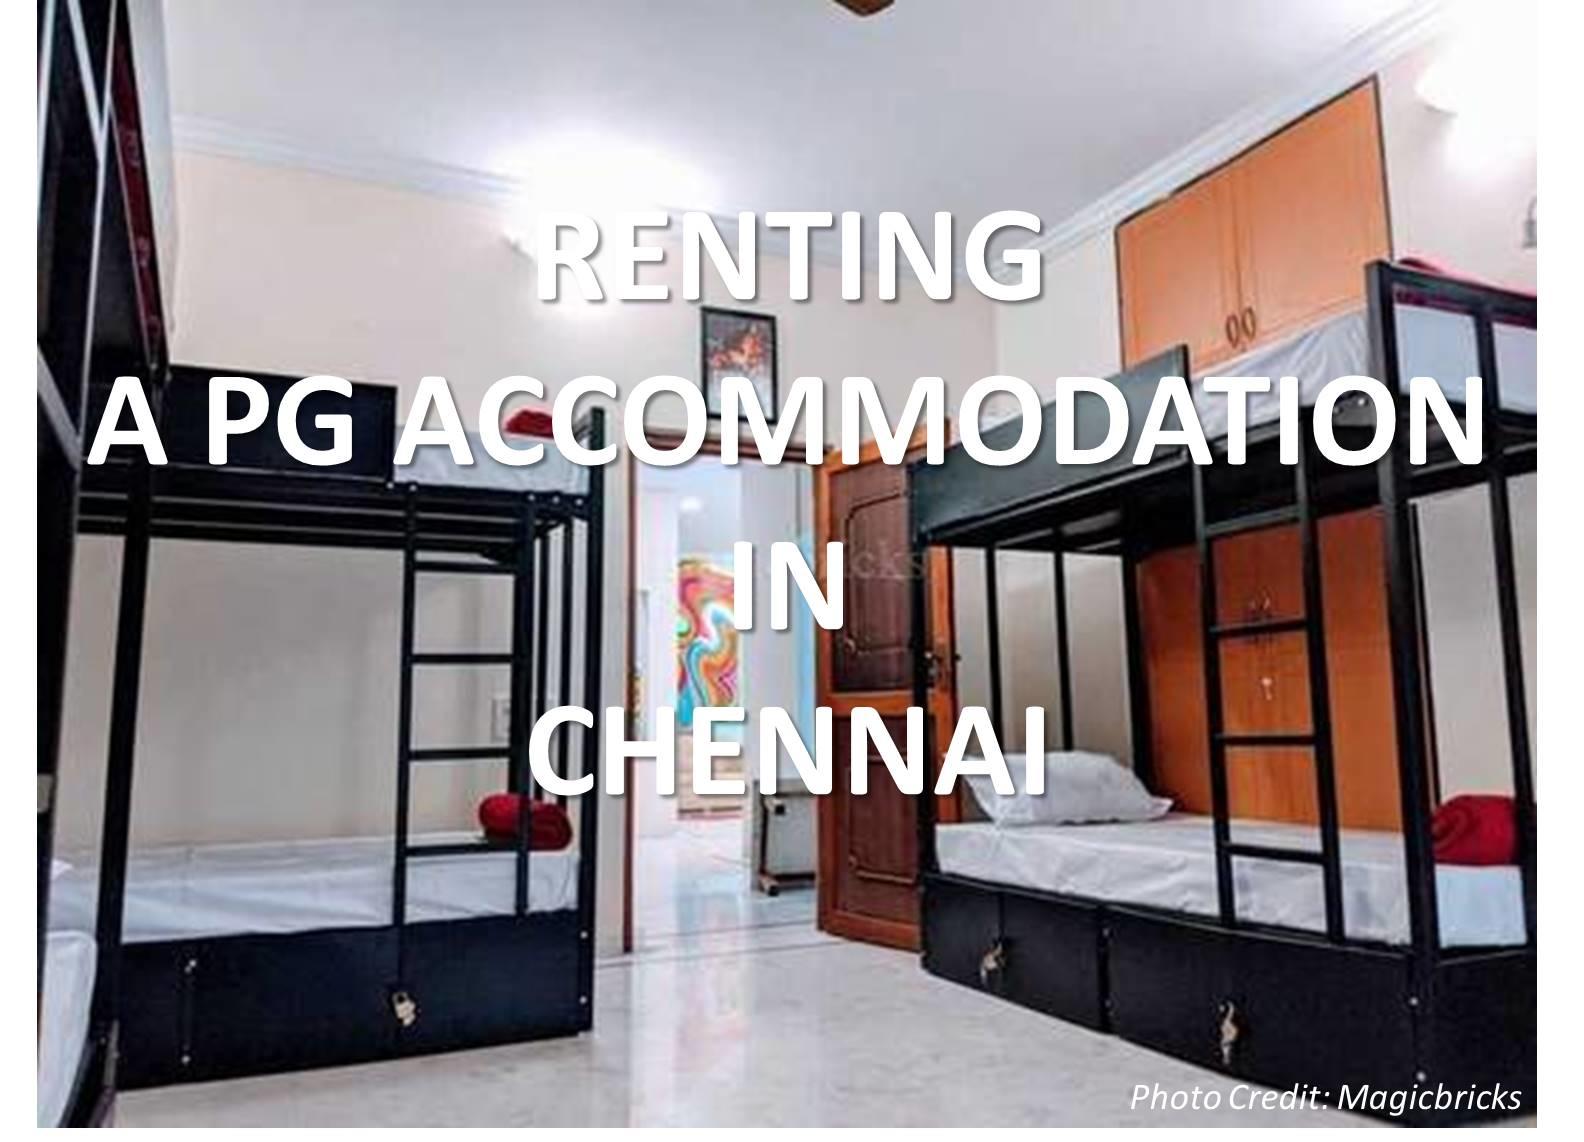 Things to remember while renting a PG accommodation in Chennai